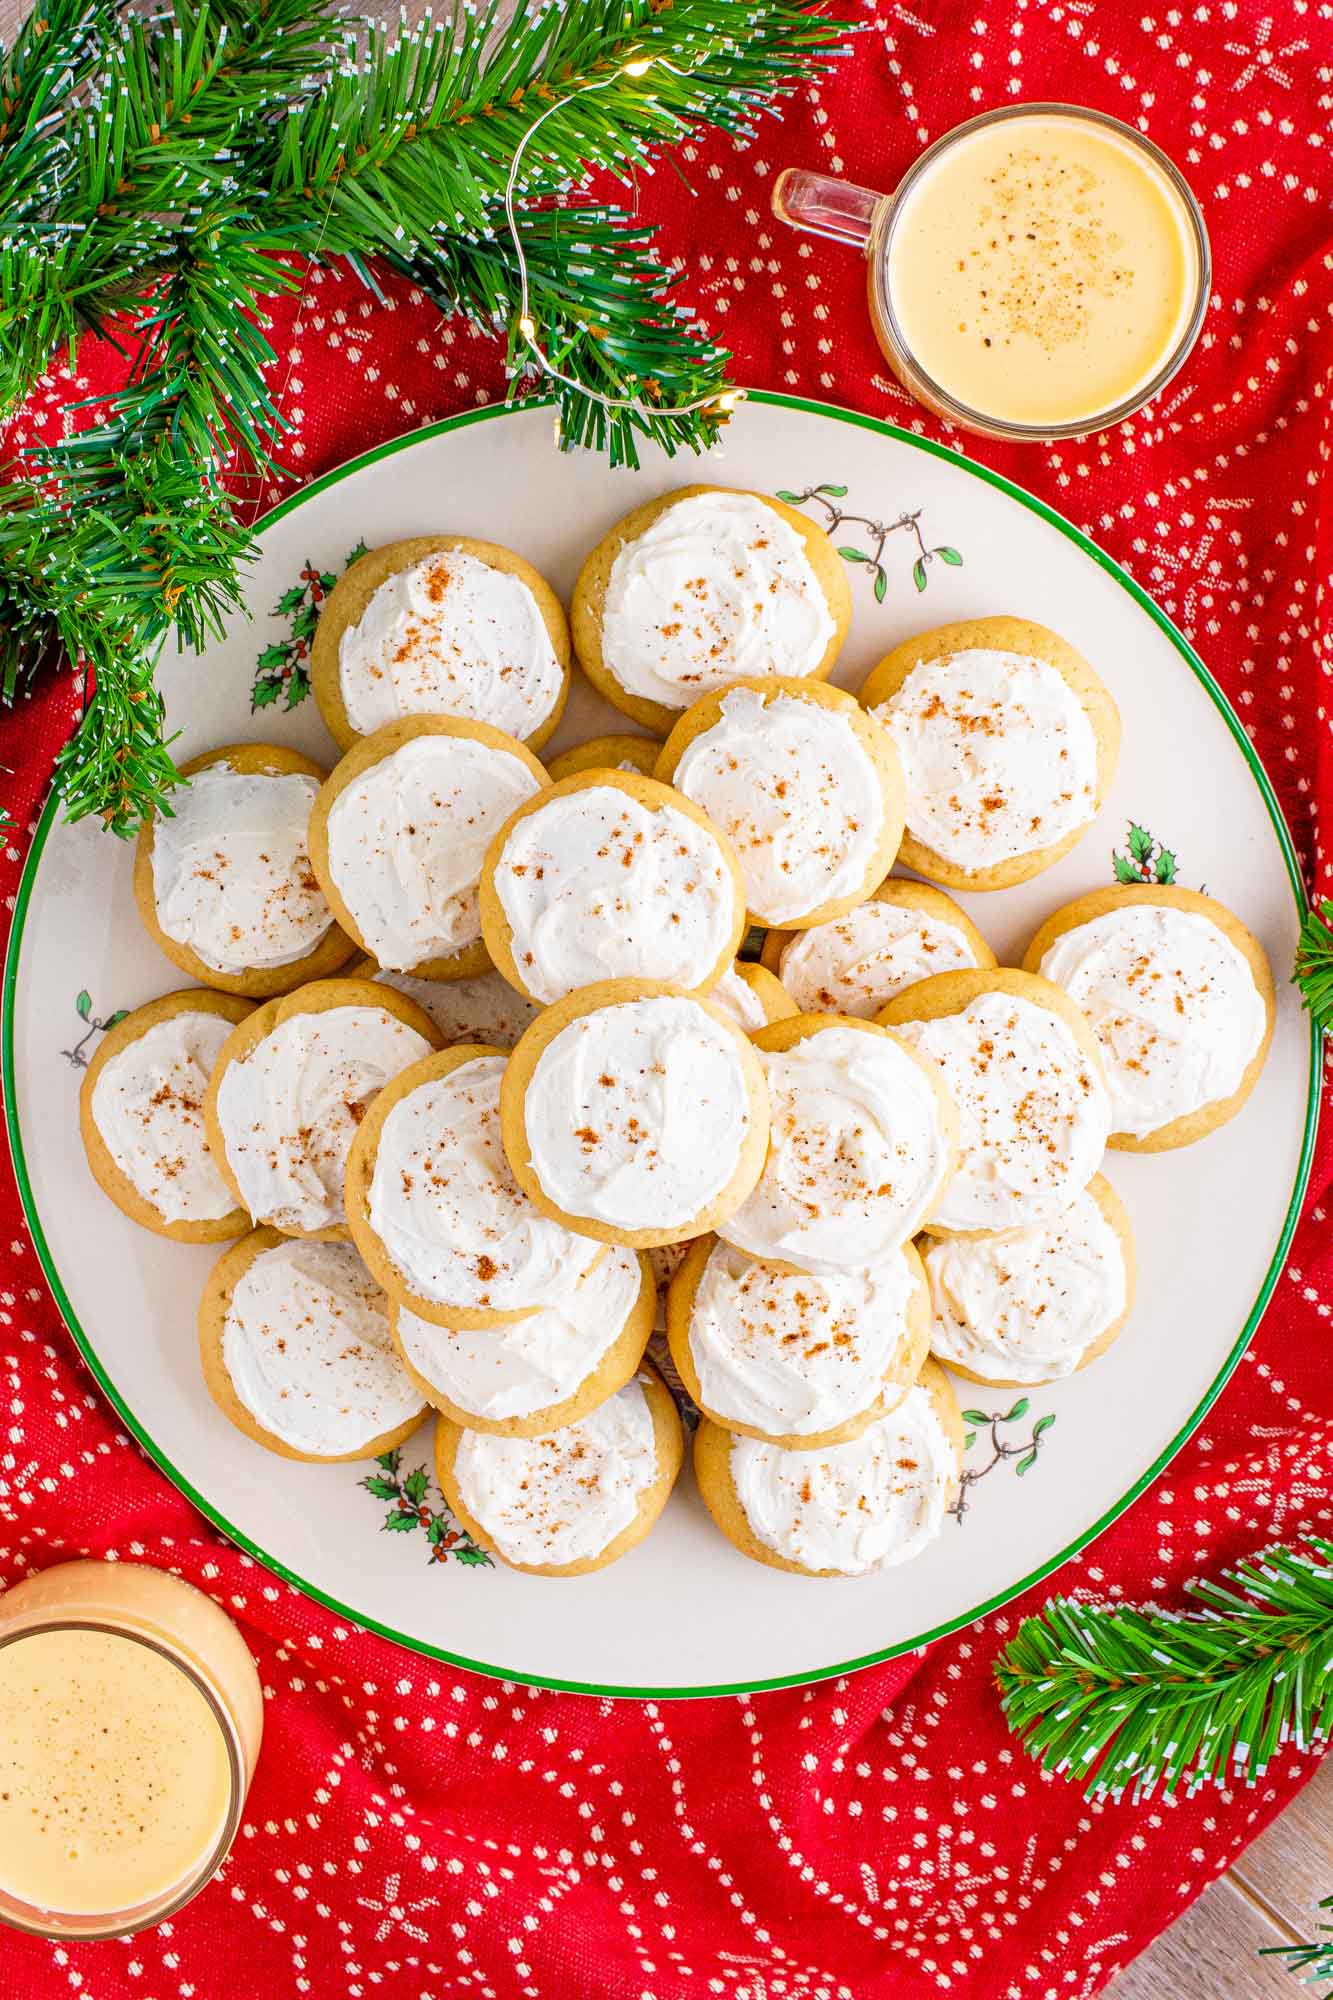 a round christmas plate filled with small eggnog cookies with white icing next to two mugs of eggnog